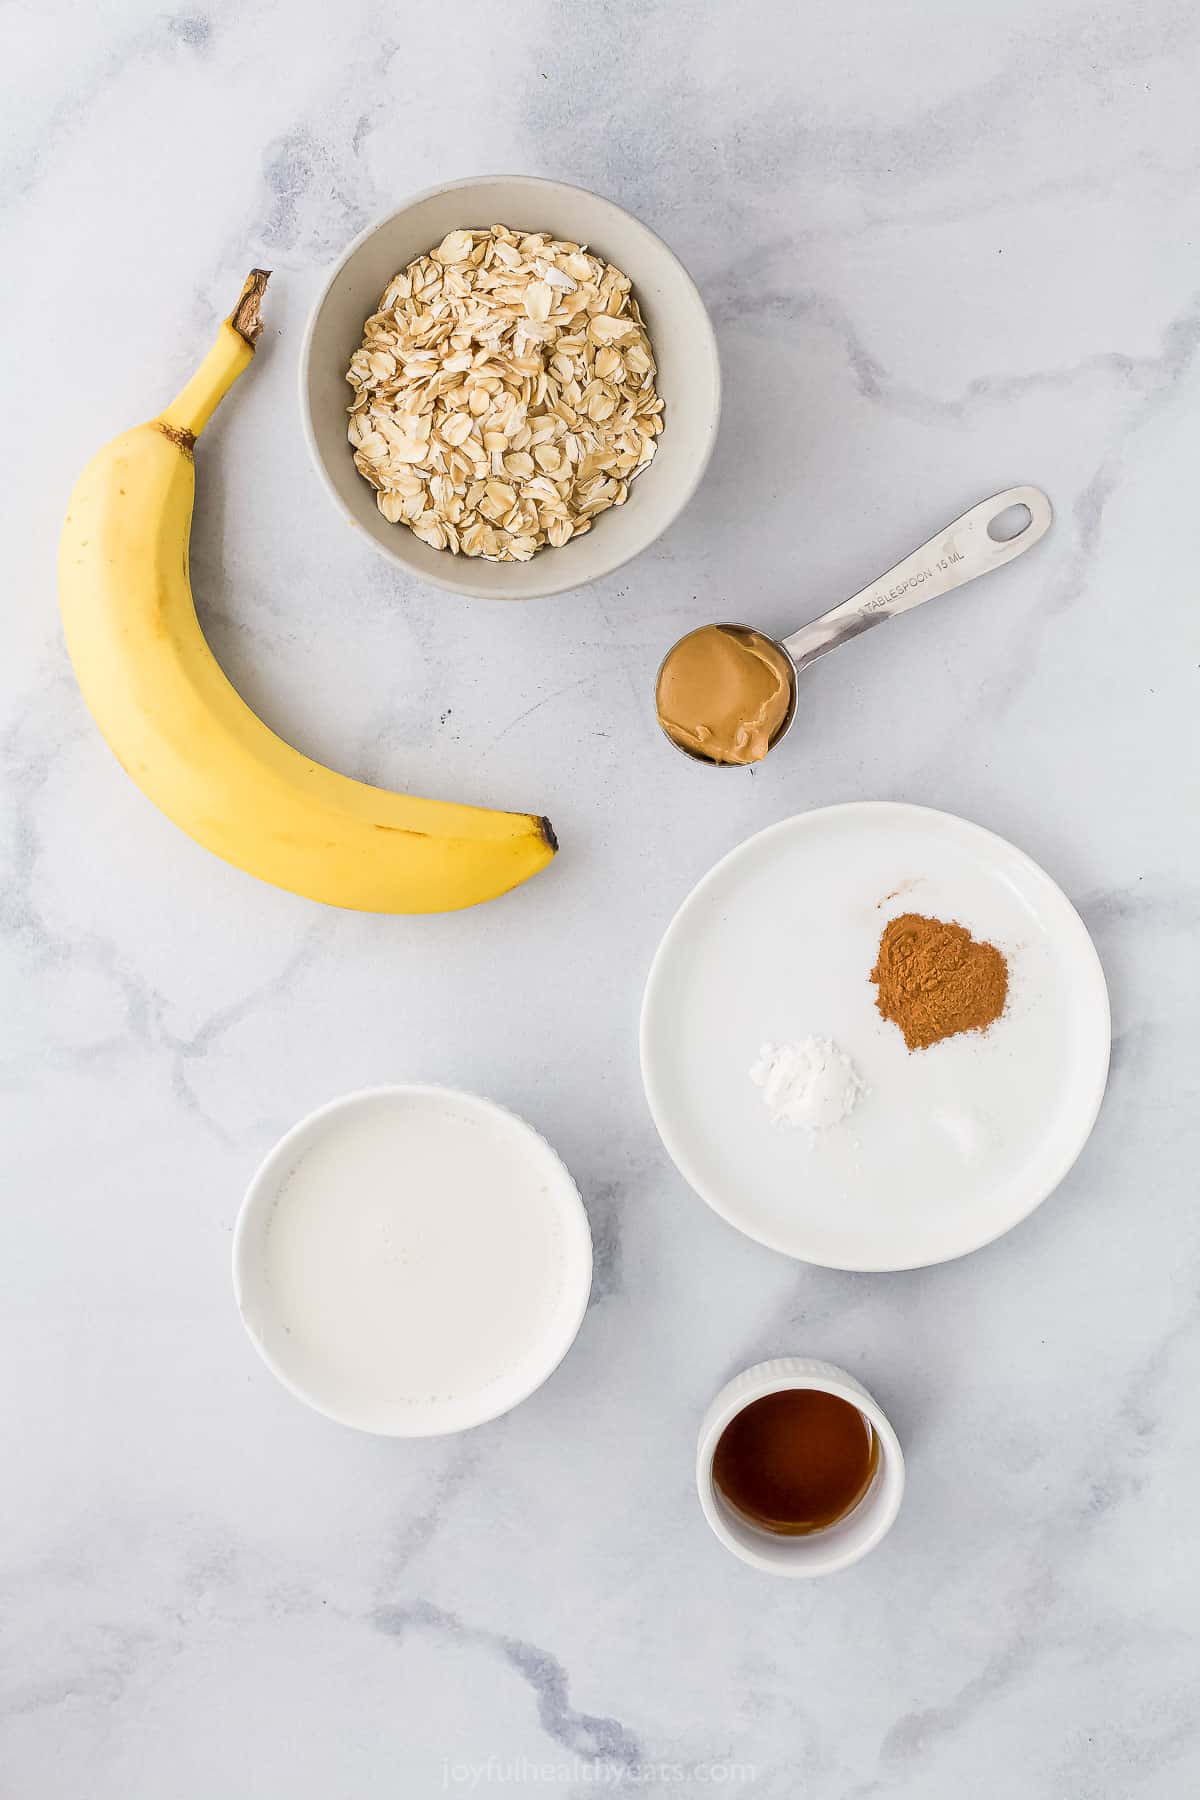 A fresh banana, a bowl of oats, cinnamon and the rest of the chocolate peanut butter baked oatmeal ingredients on a countertop